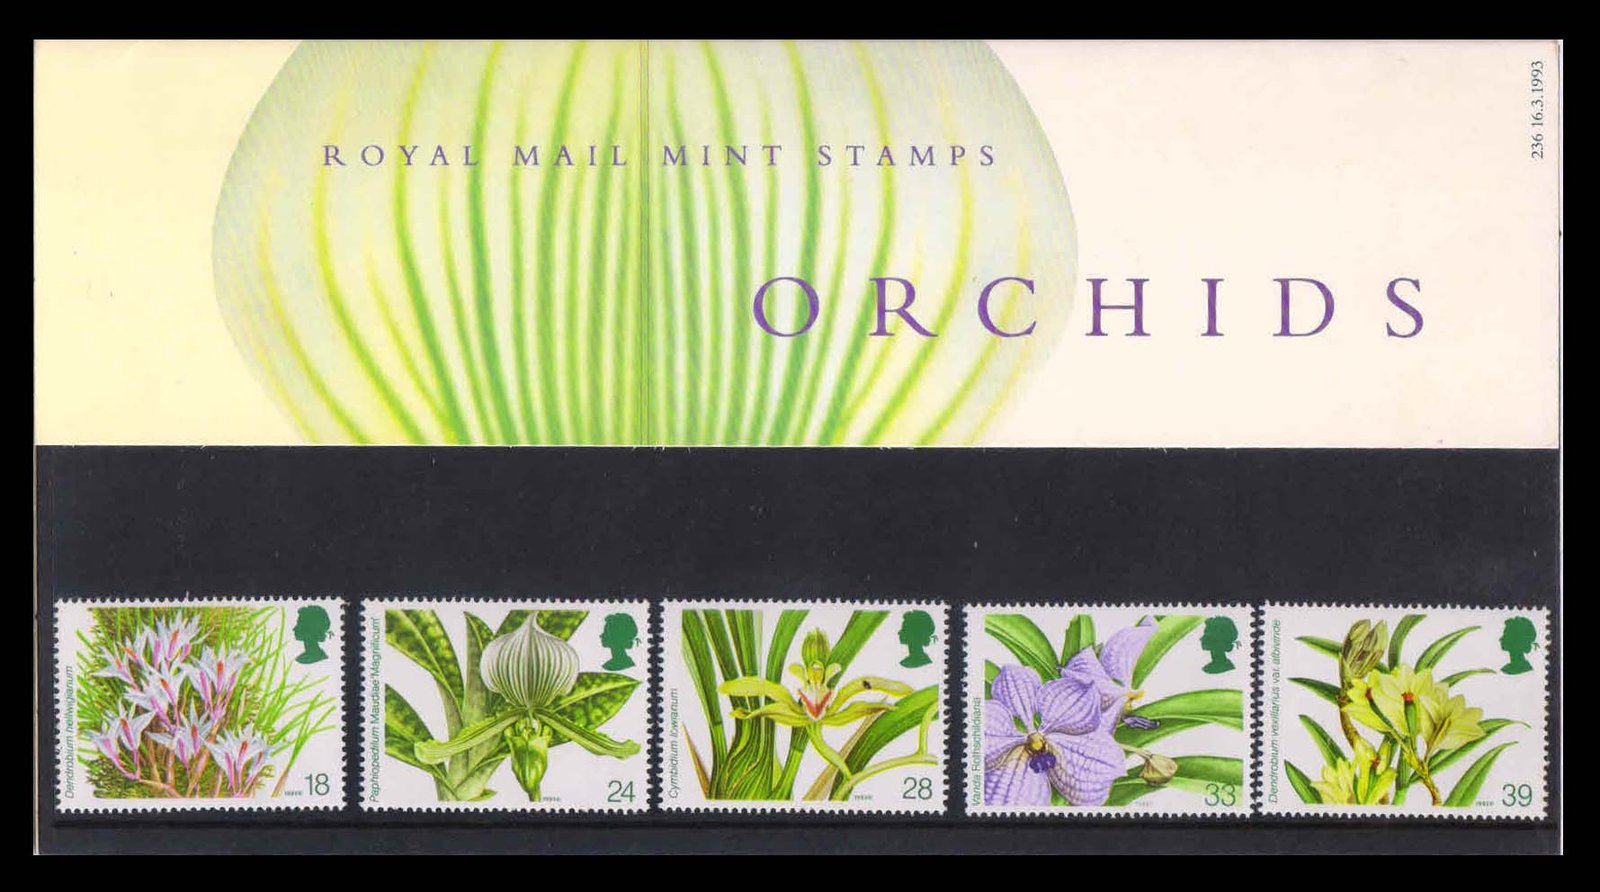 GREAT BRITAIN 1993 - World Orchid Conference, Flowers, Set of 5 Stamps, Presentation Pack, MNH